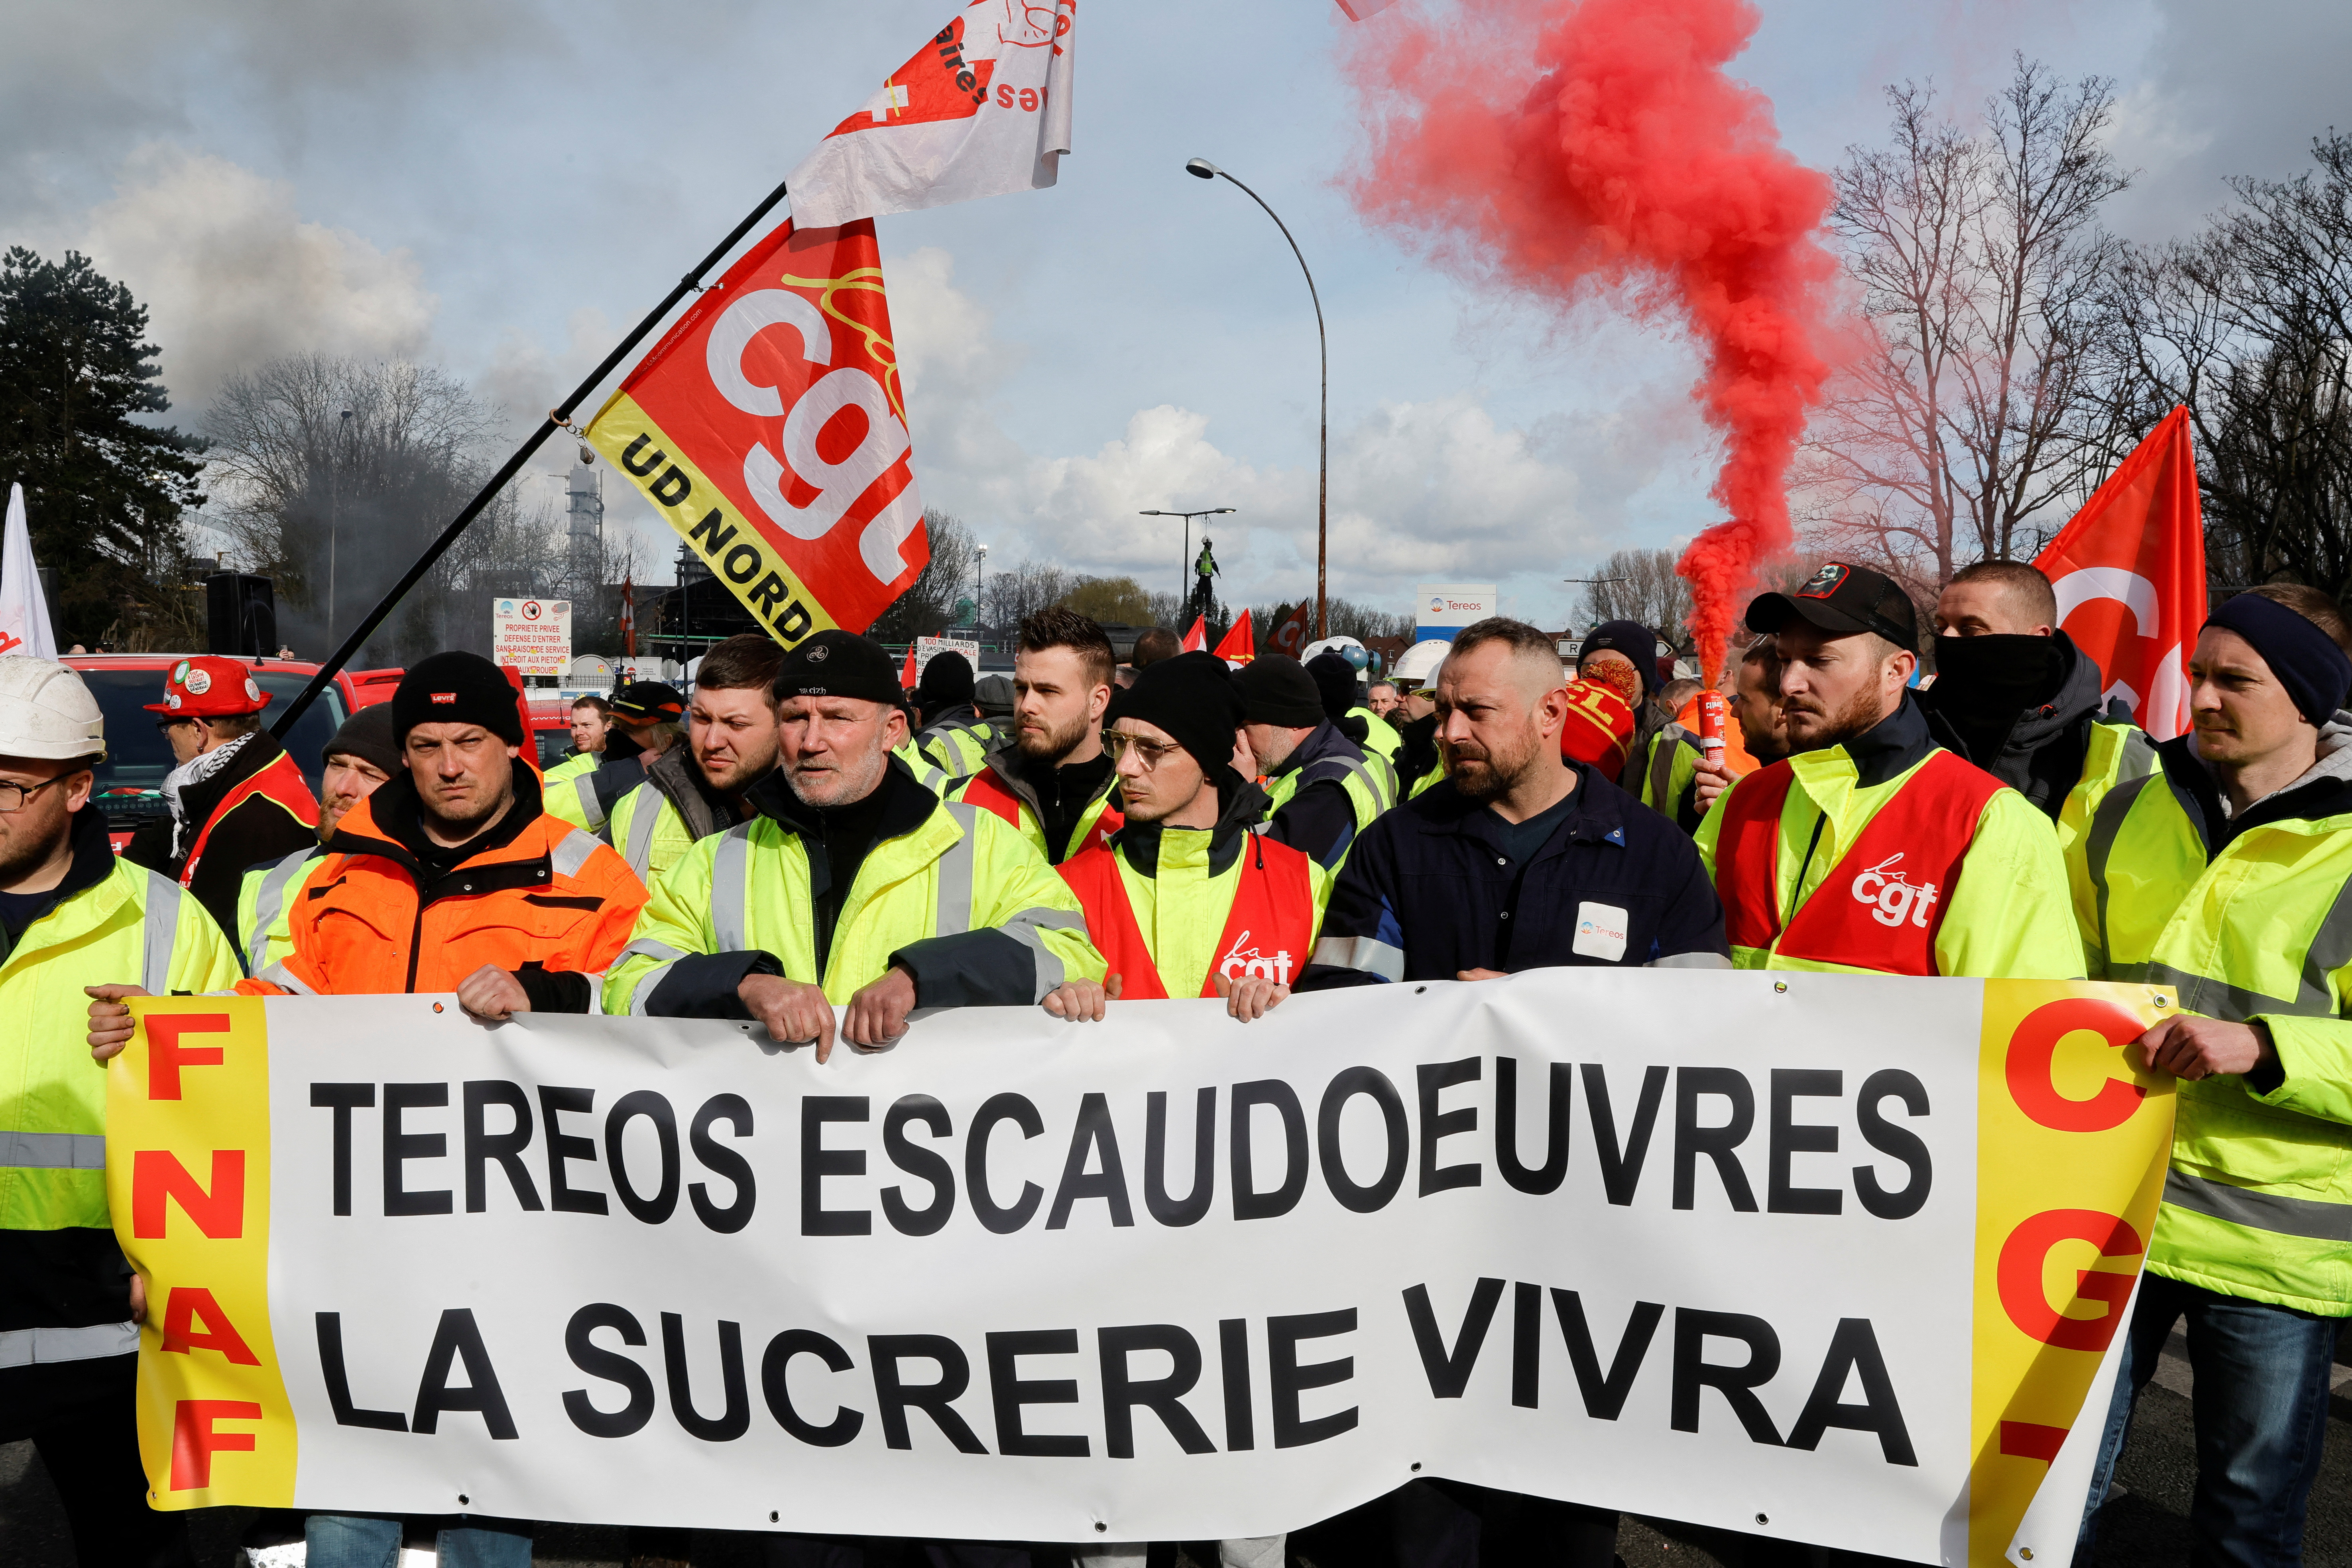 Eighth day of national protest in France against the pension reform